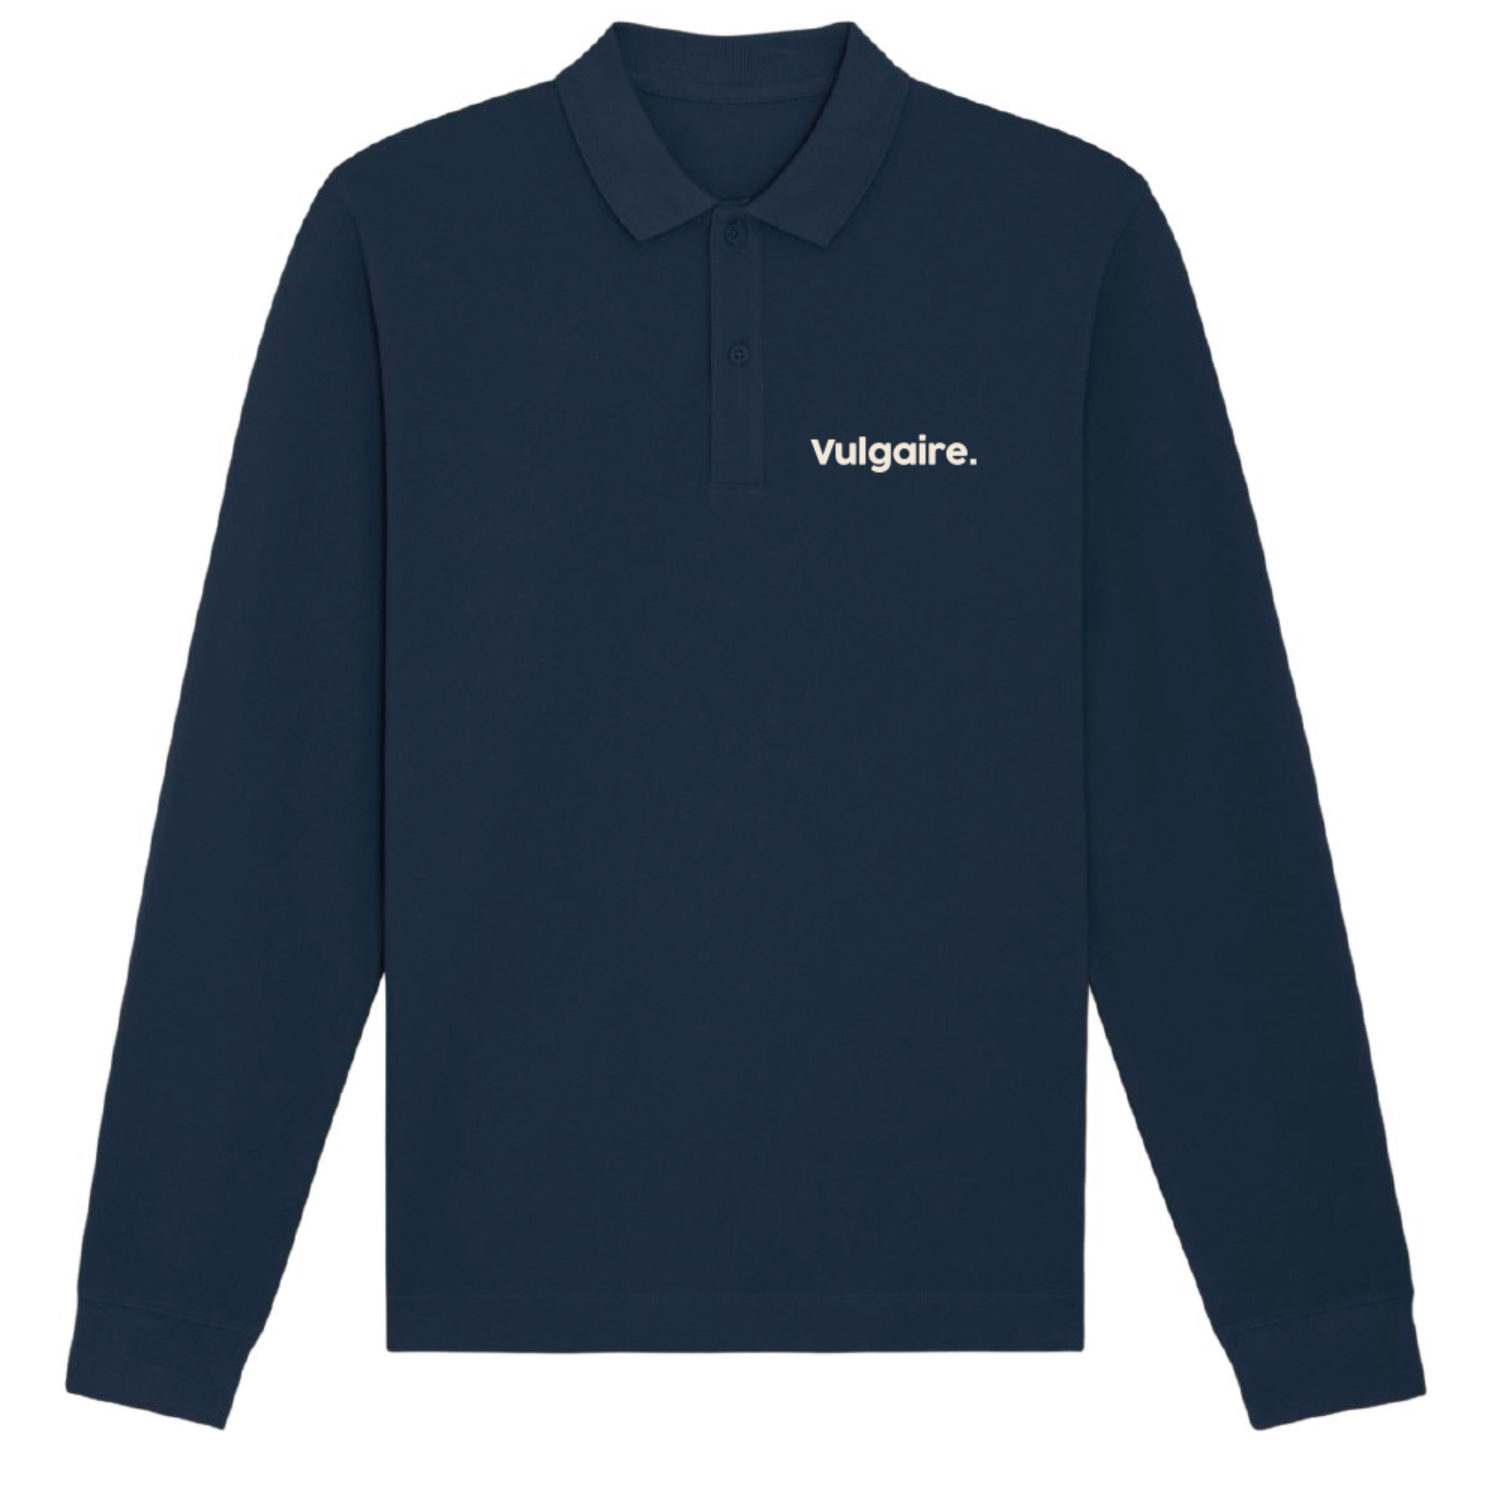 Polo LM - Vulgaire. - Navy